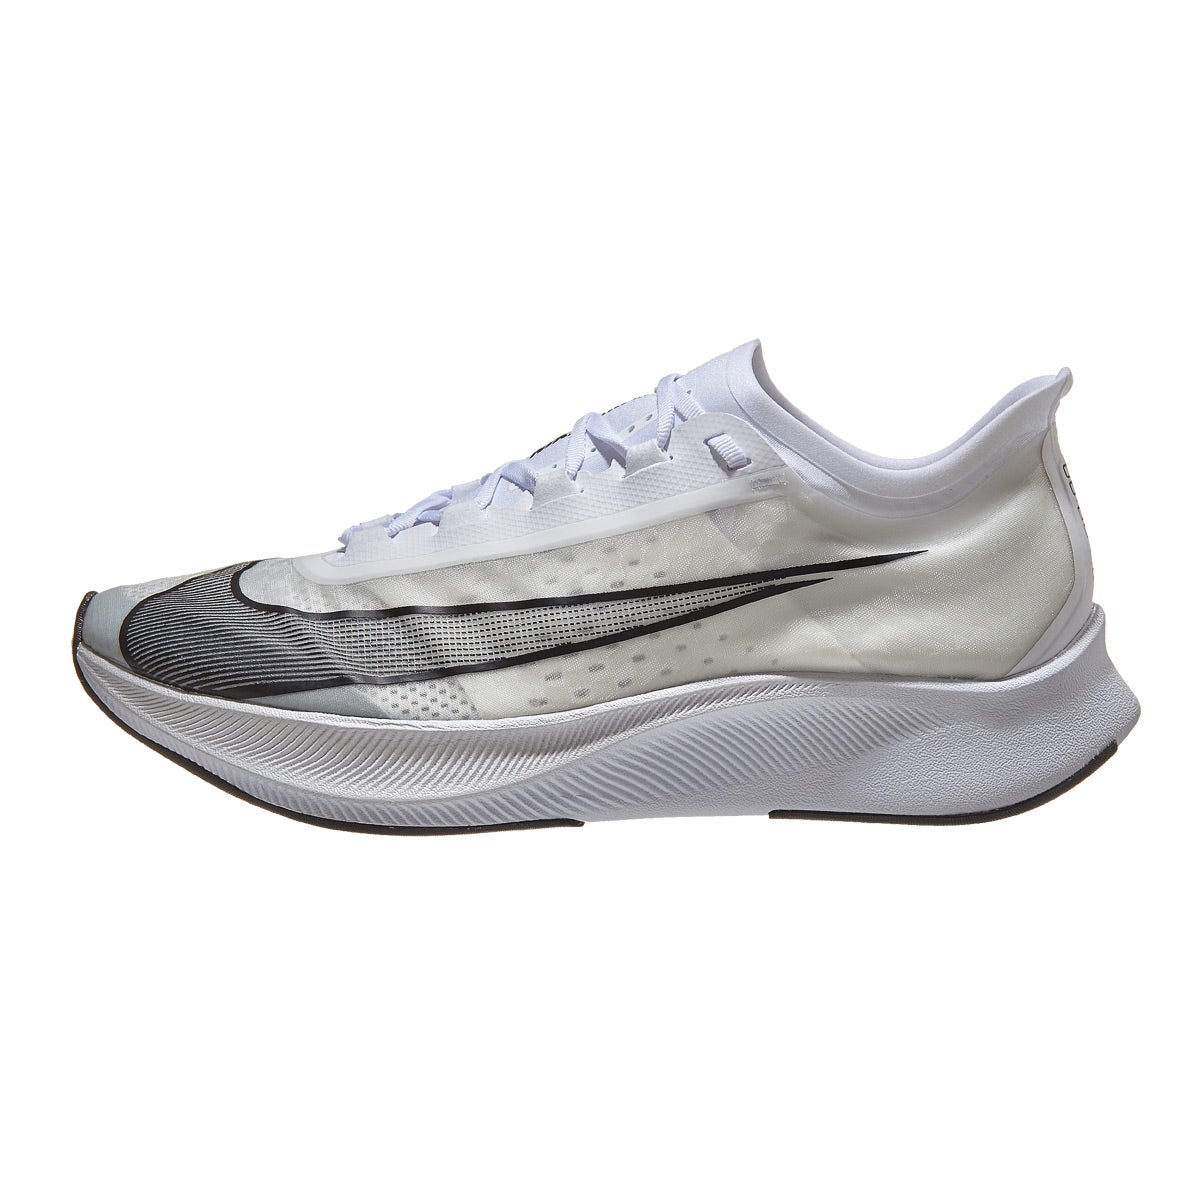 Nike Zoom Fly 3 Men's Shoes White/Black/Grey 360° View | Running Warehouse